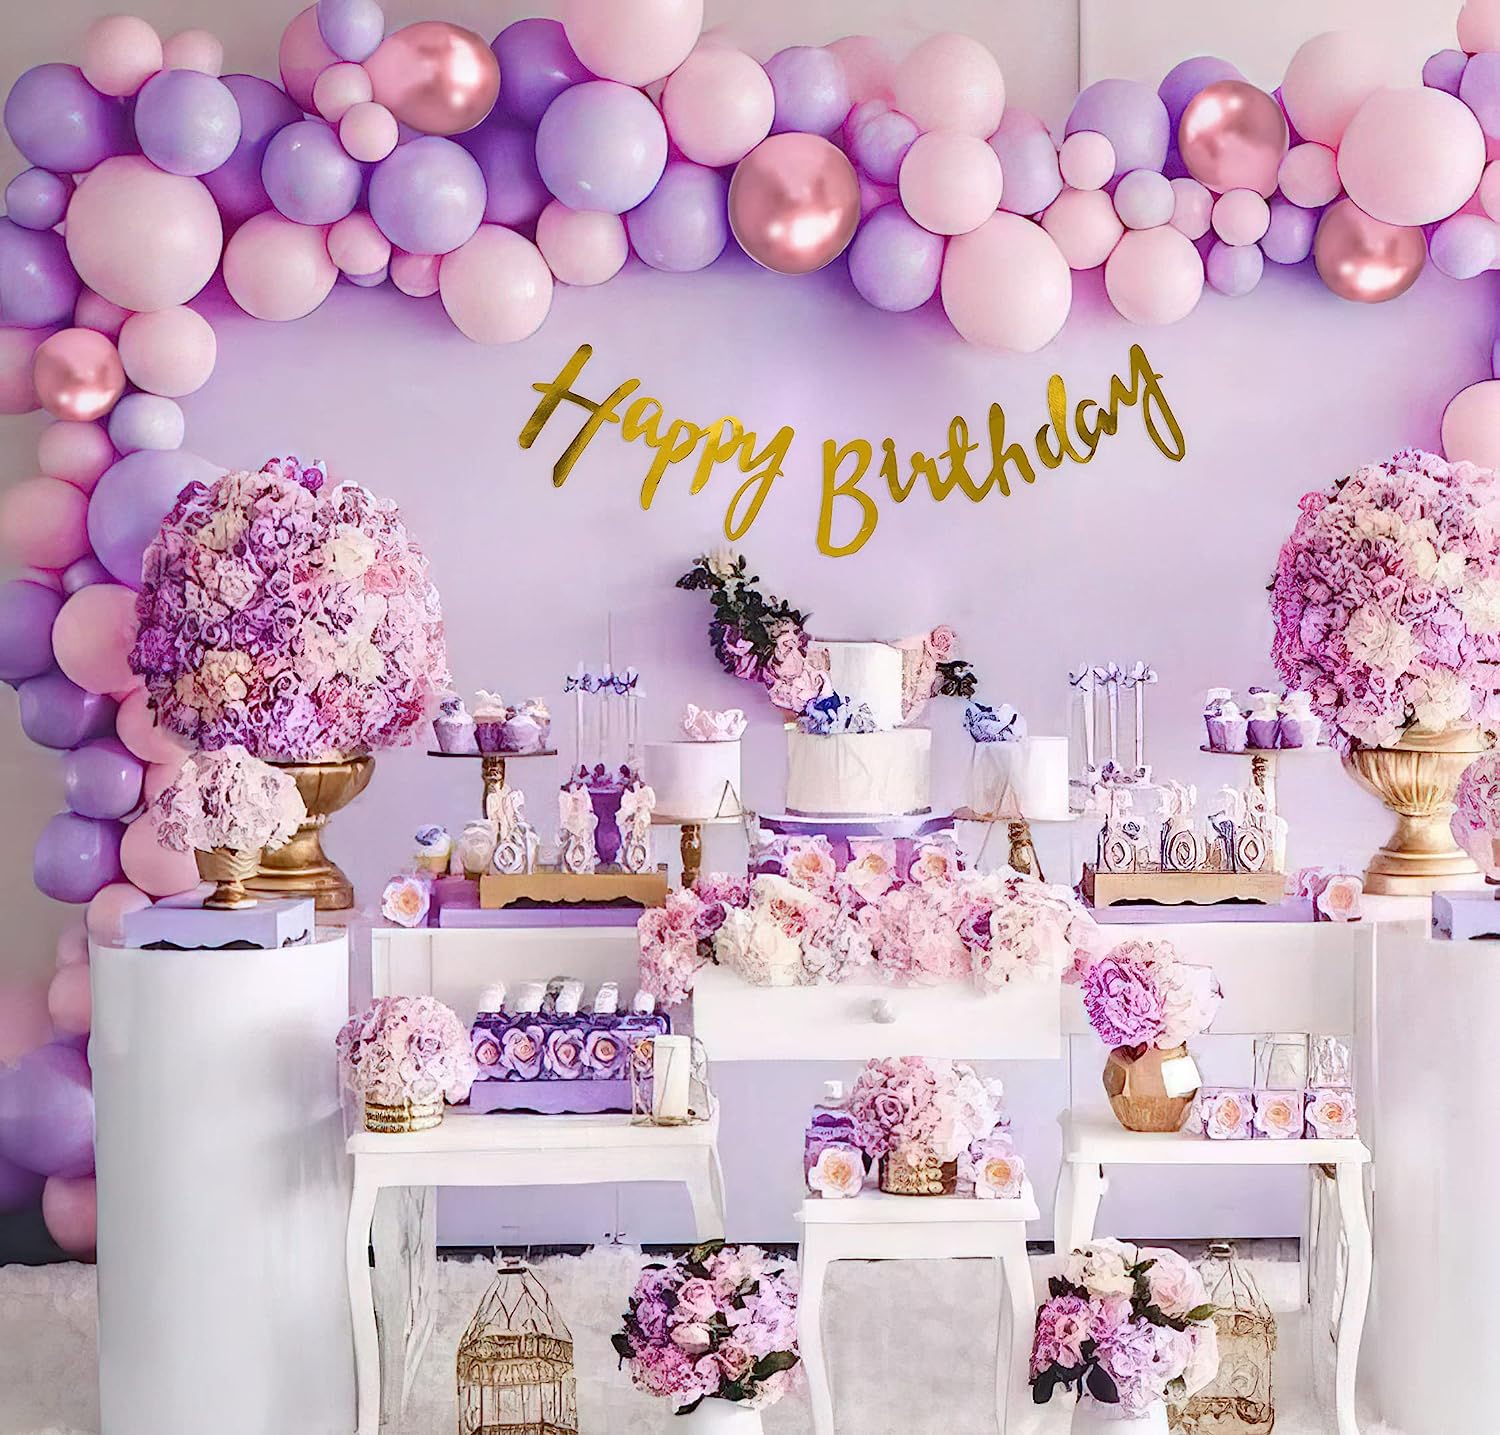 1st Birthday Decorations for Girls, Pink White Confetti Balloons and Pink  Gold Tablecloth Pink Birthday Balloons Happy Birthday Banner with Number 1